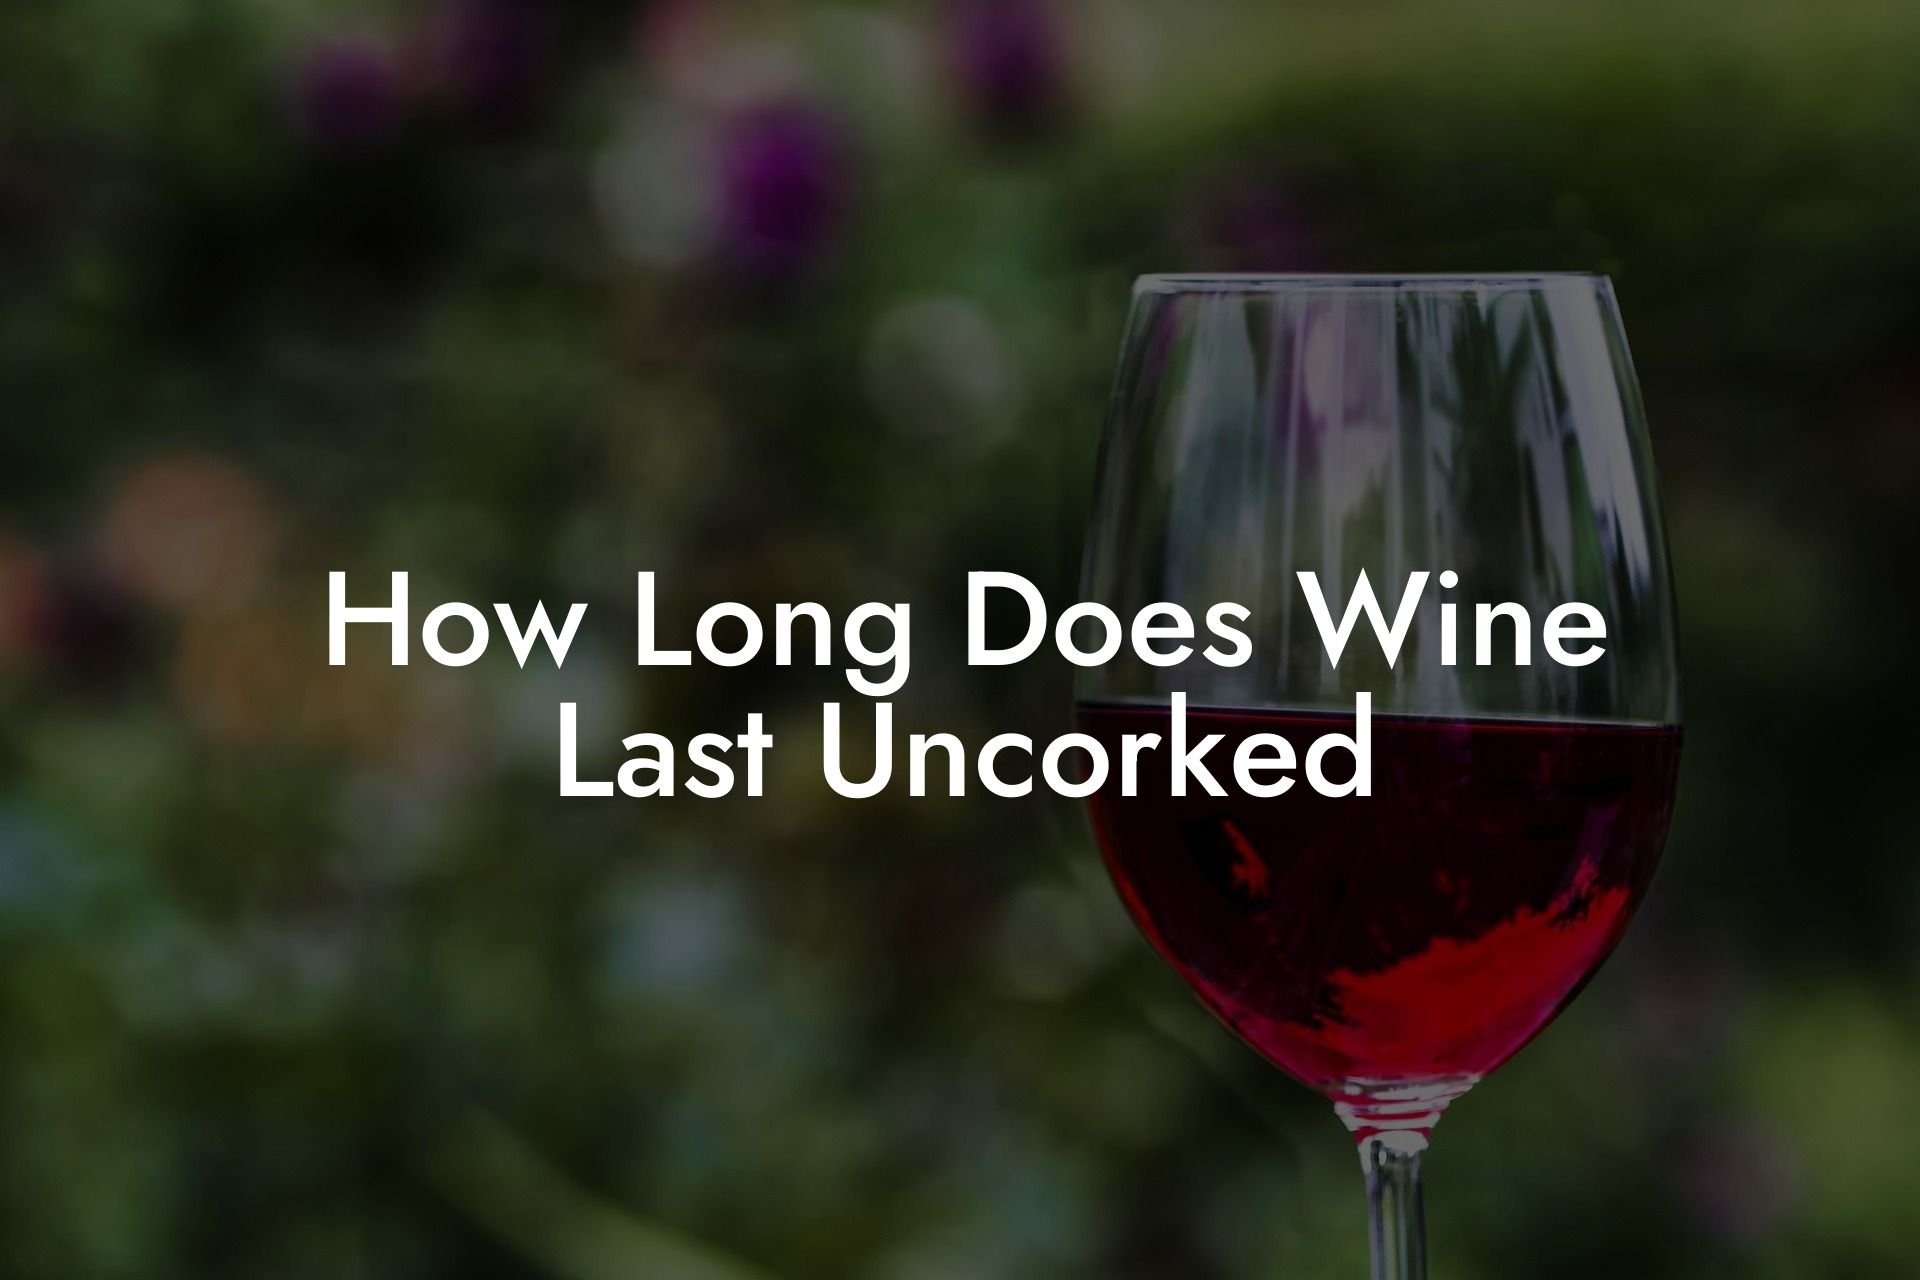 How Long Does Wine Last Uncorked